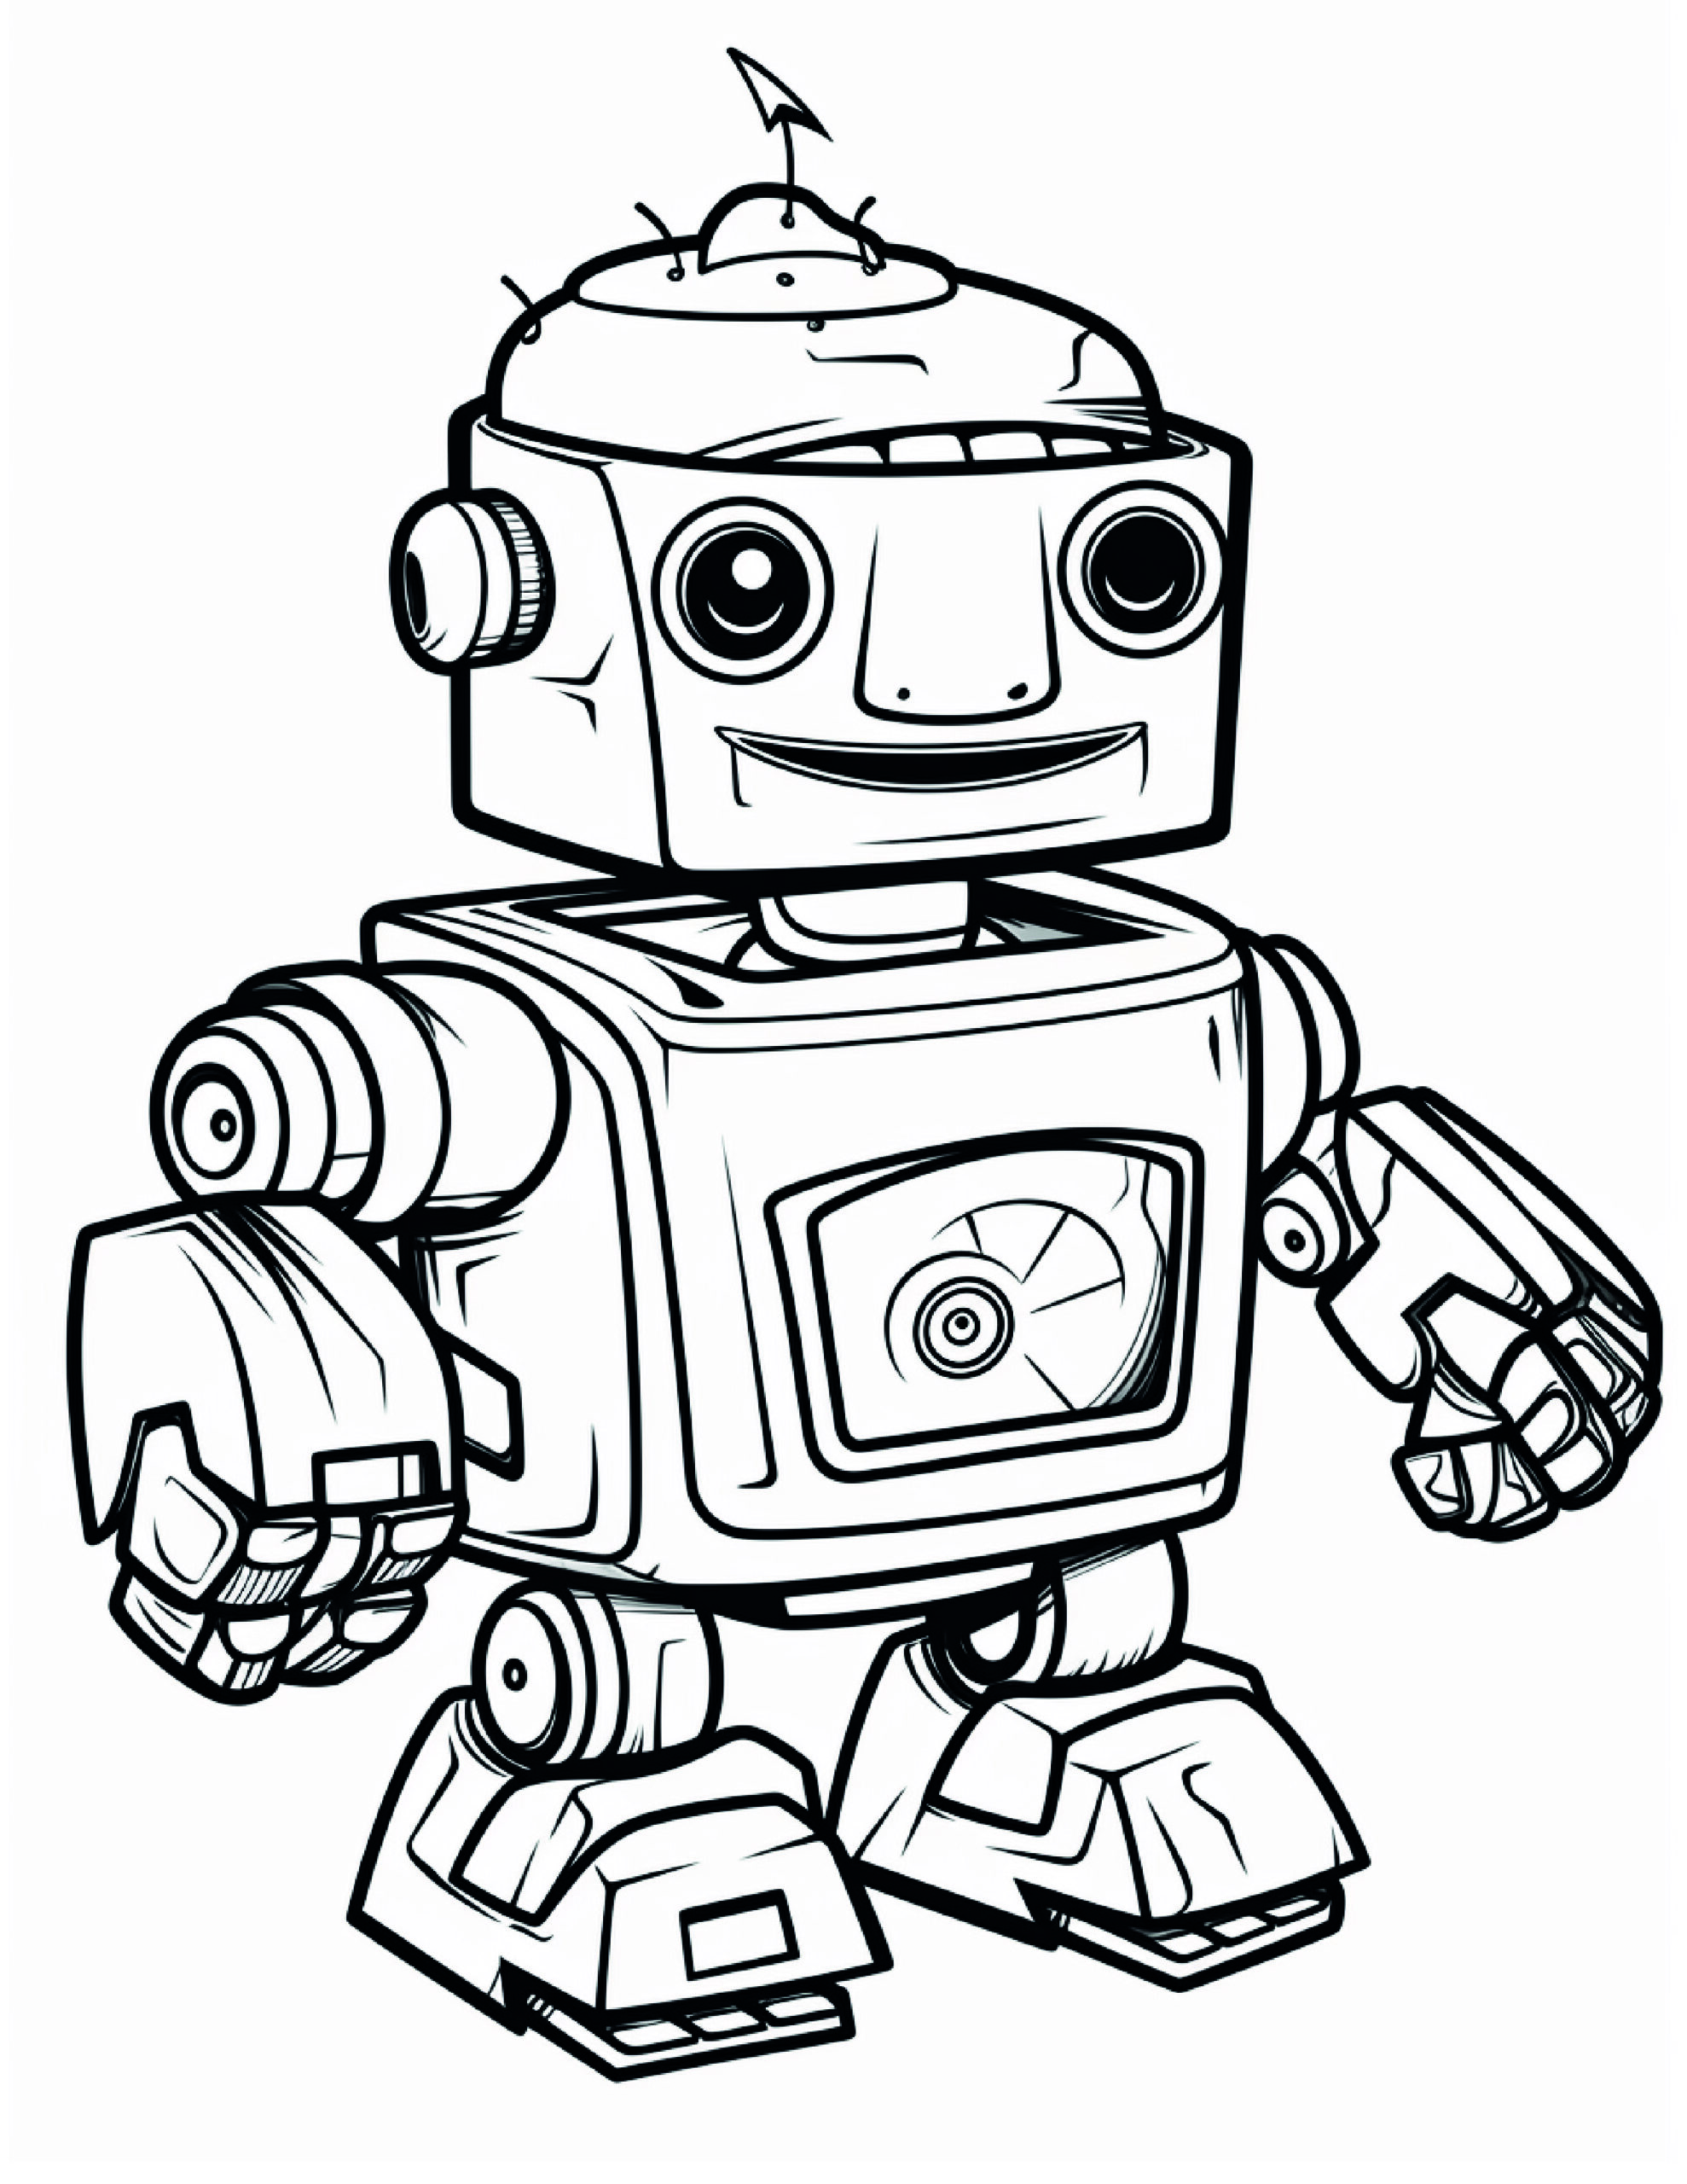 Robot Coloring Page 12 - A line drawing of a stupid robot. 